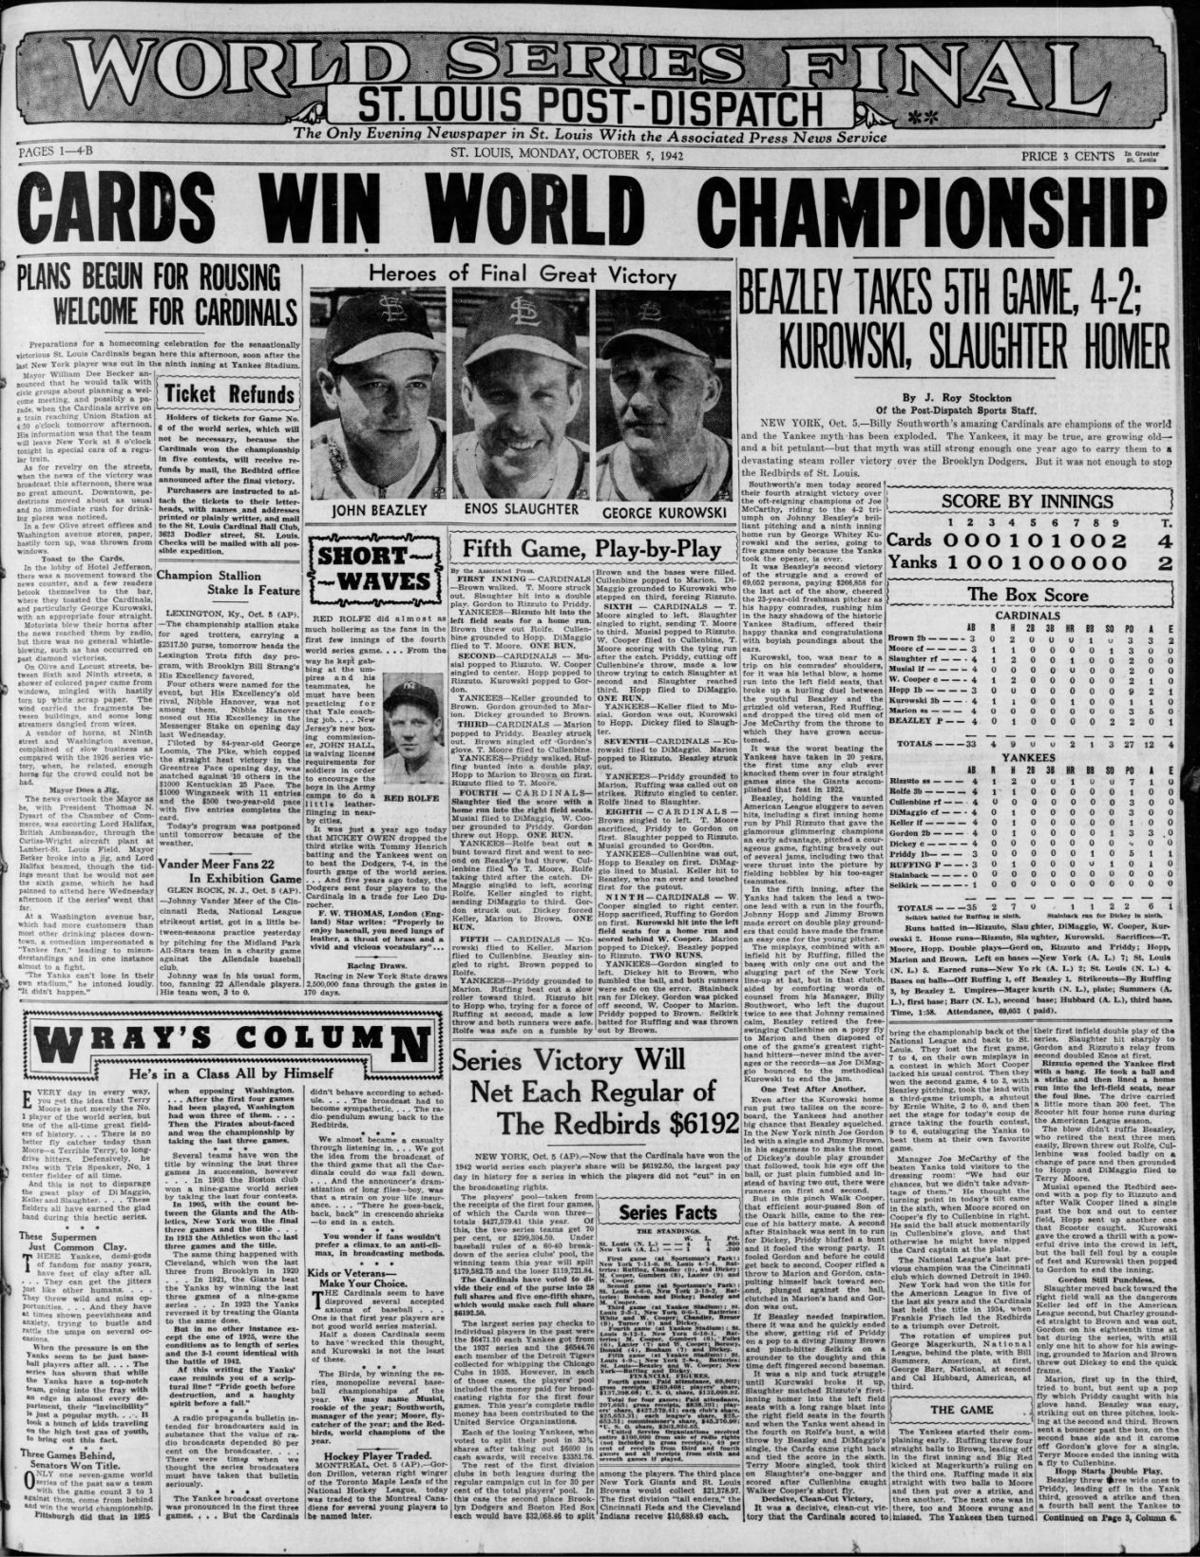 Oct. 5, 1942: Cardinals Win World Series | Post-Dispatch Archives | 0